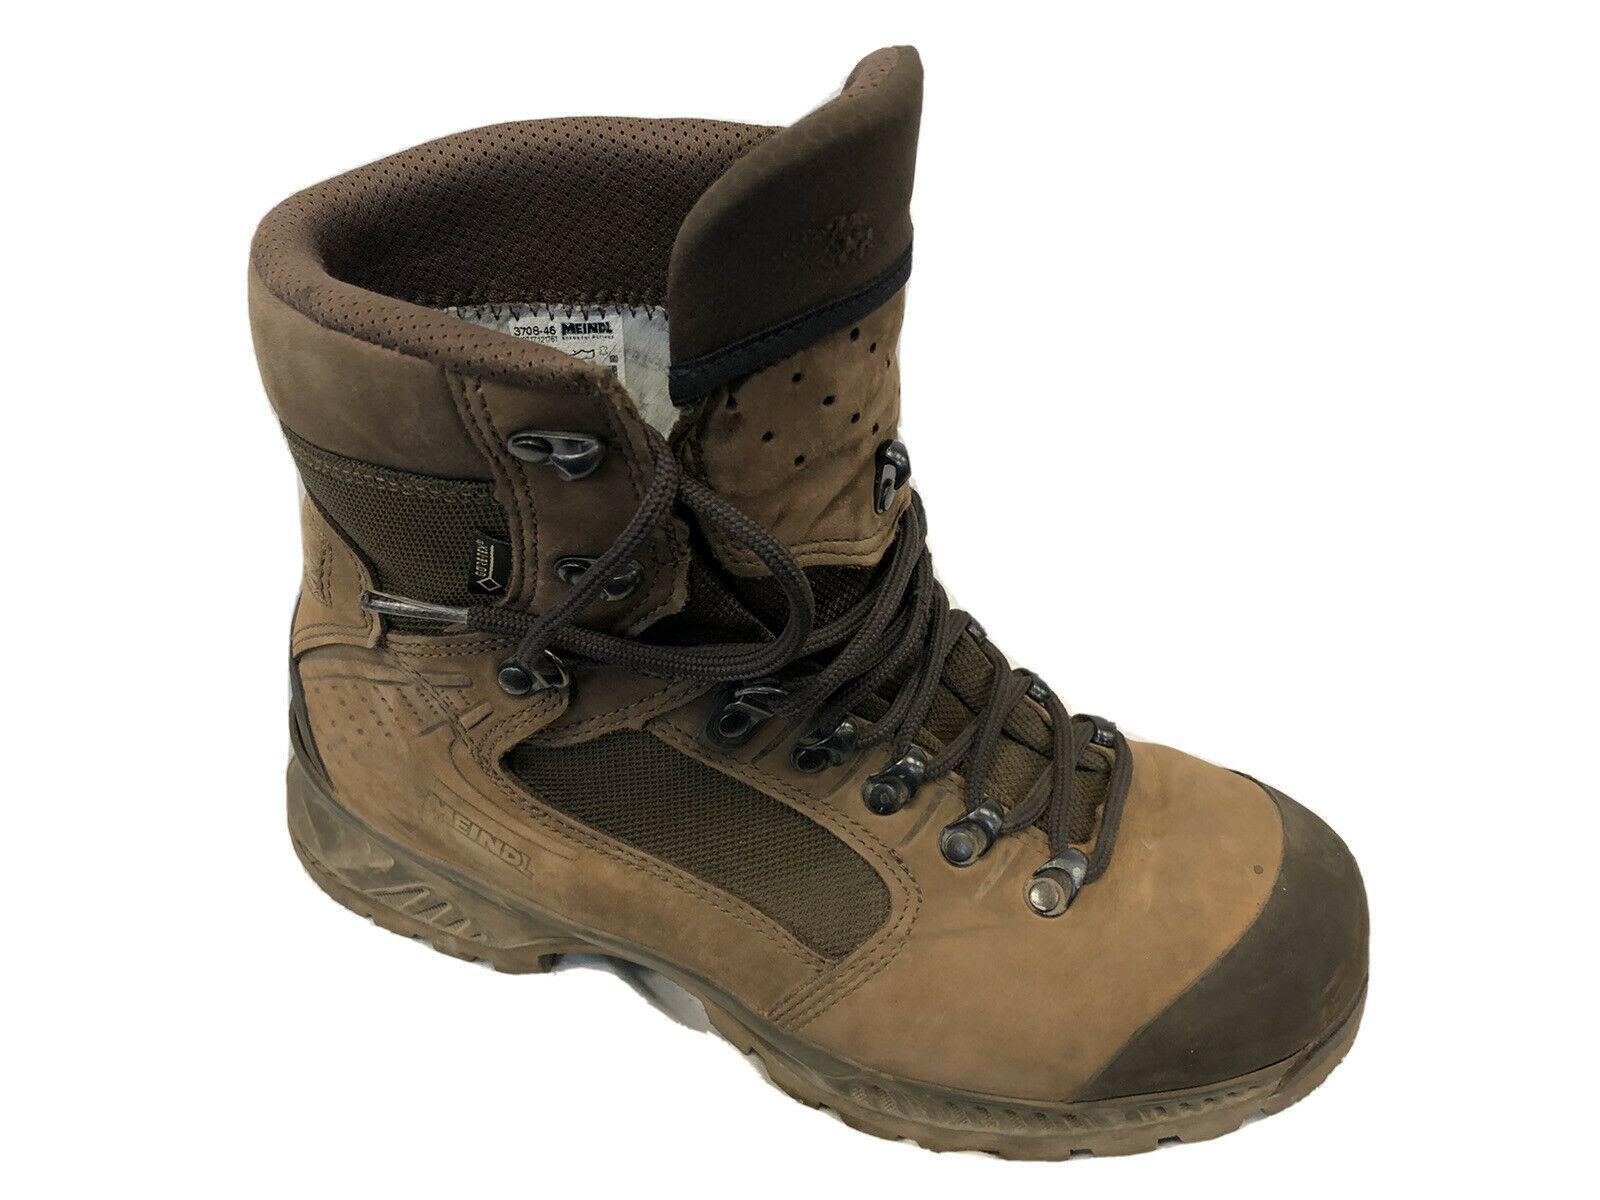 Meindl Goretex Lined Boots